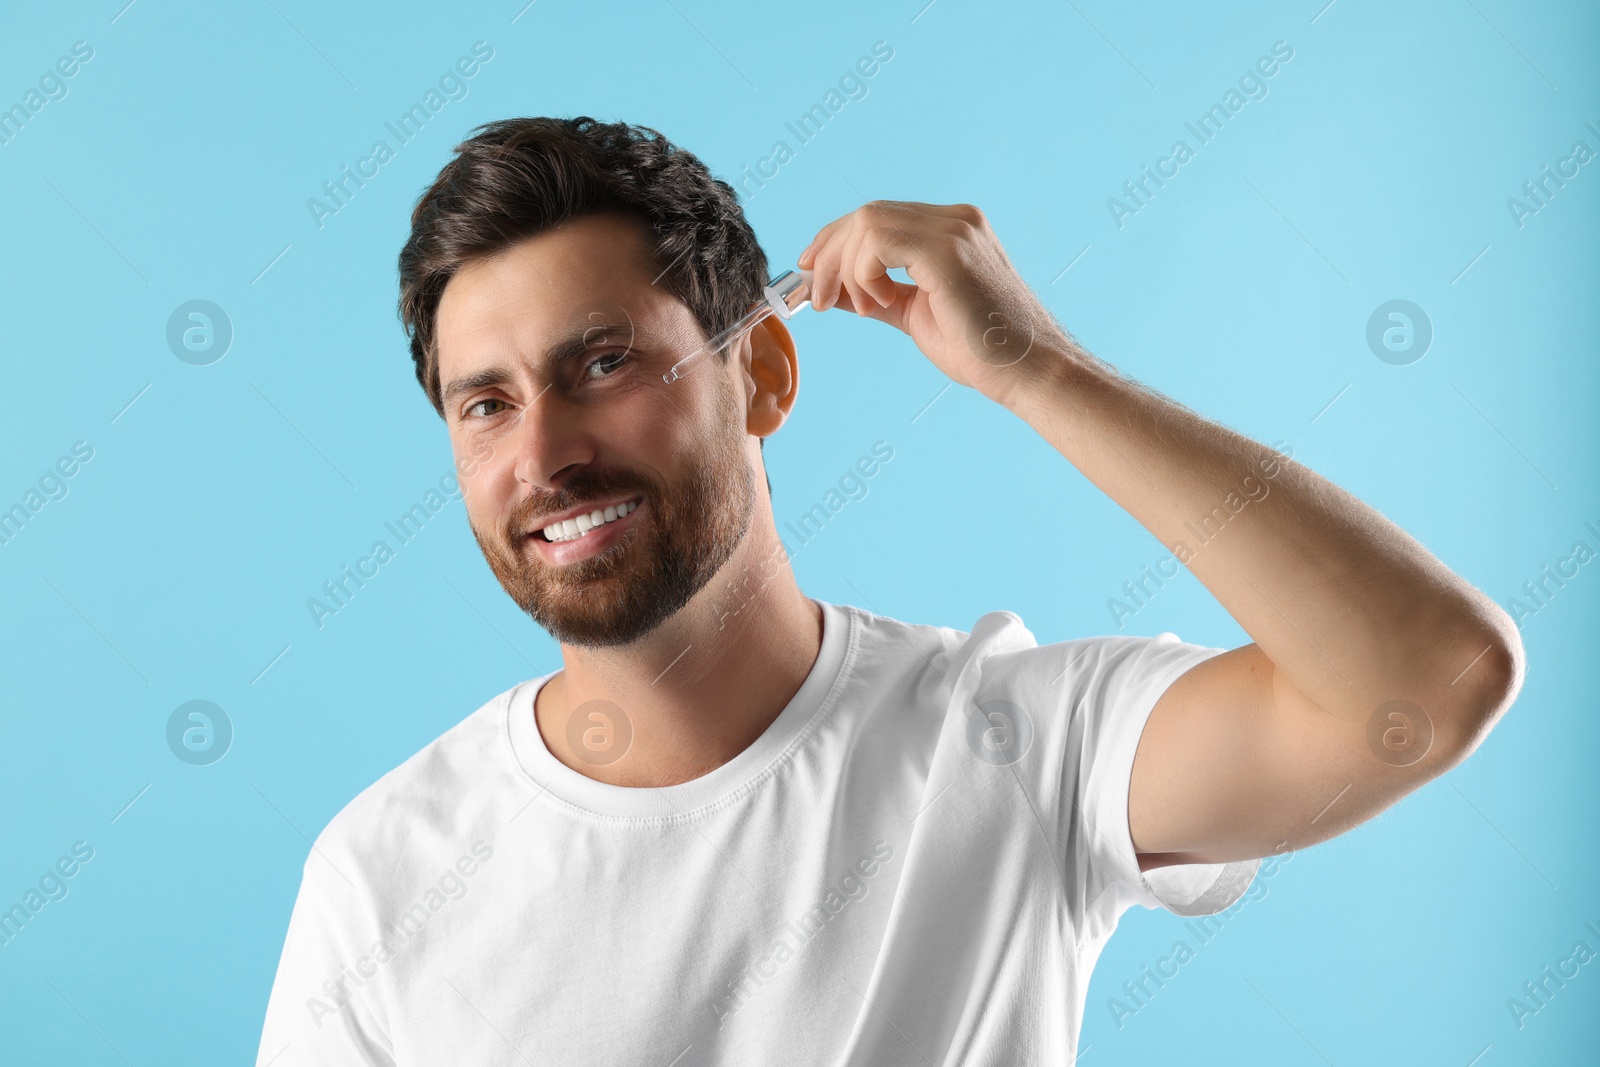 Photo of Smiling man applying cosmetic serum onto his face on light blue background